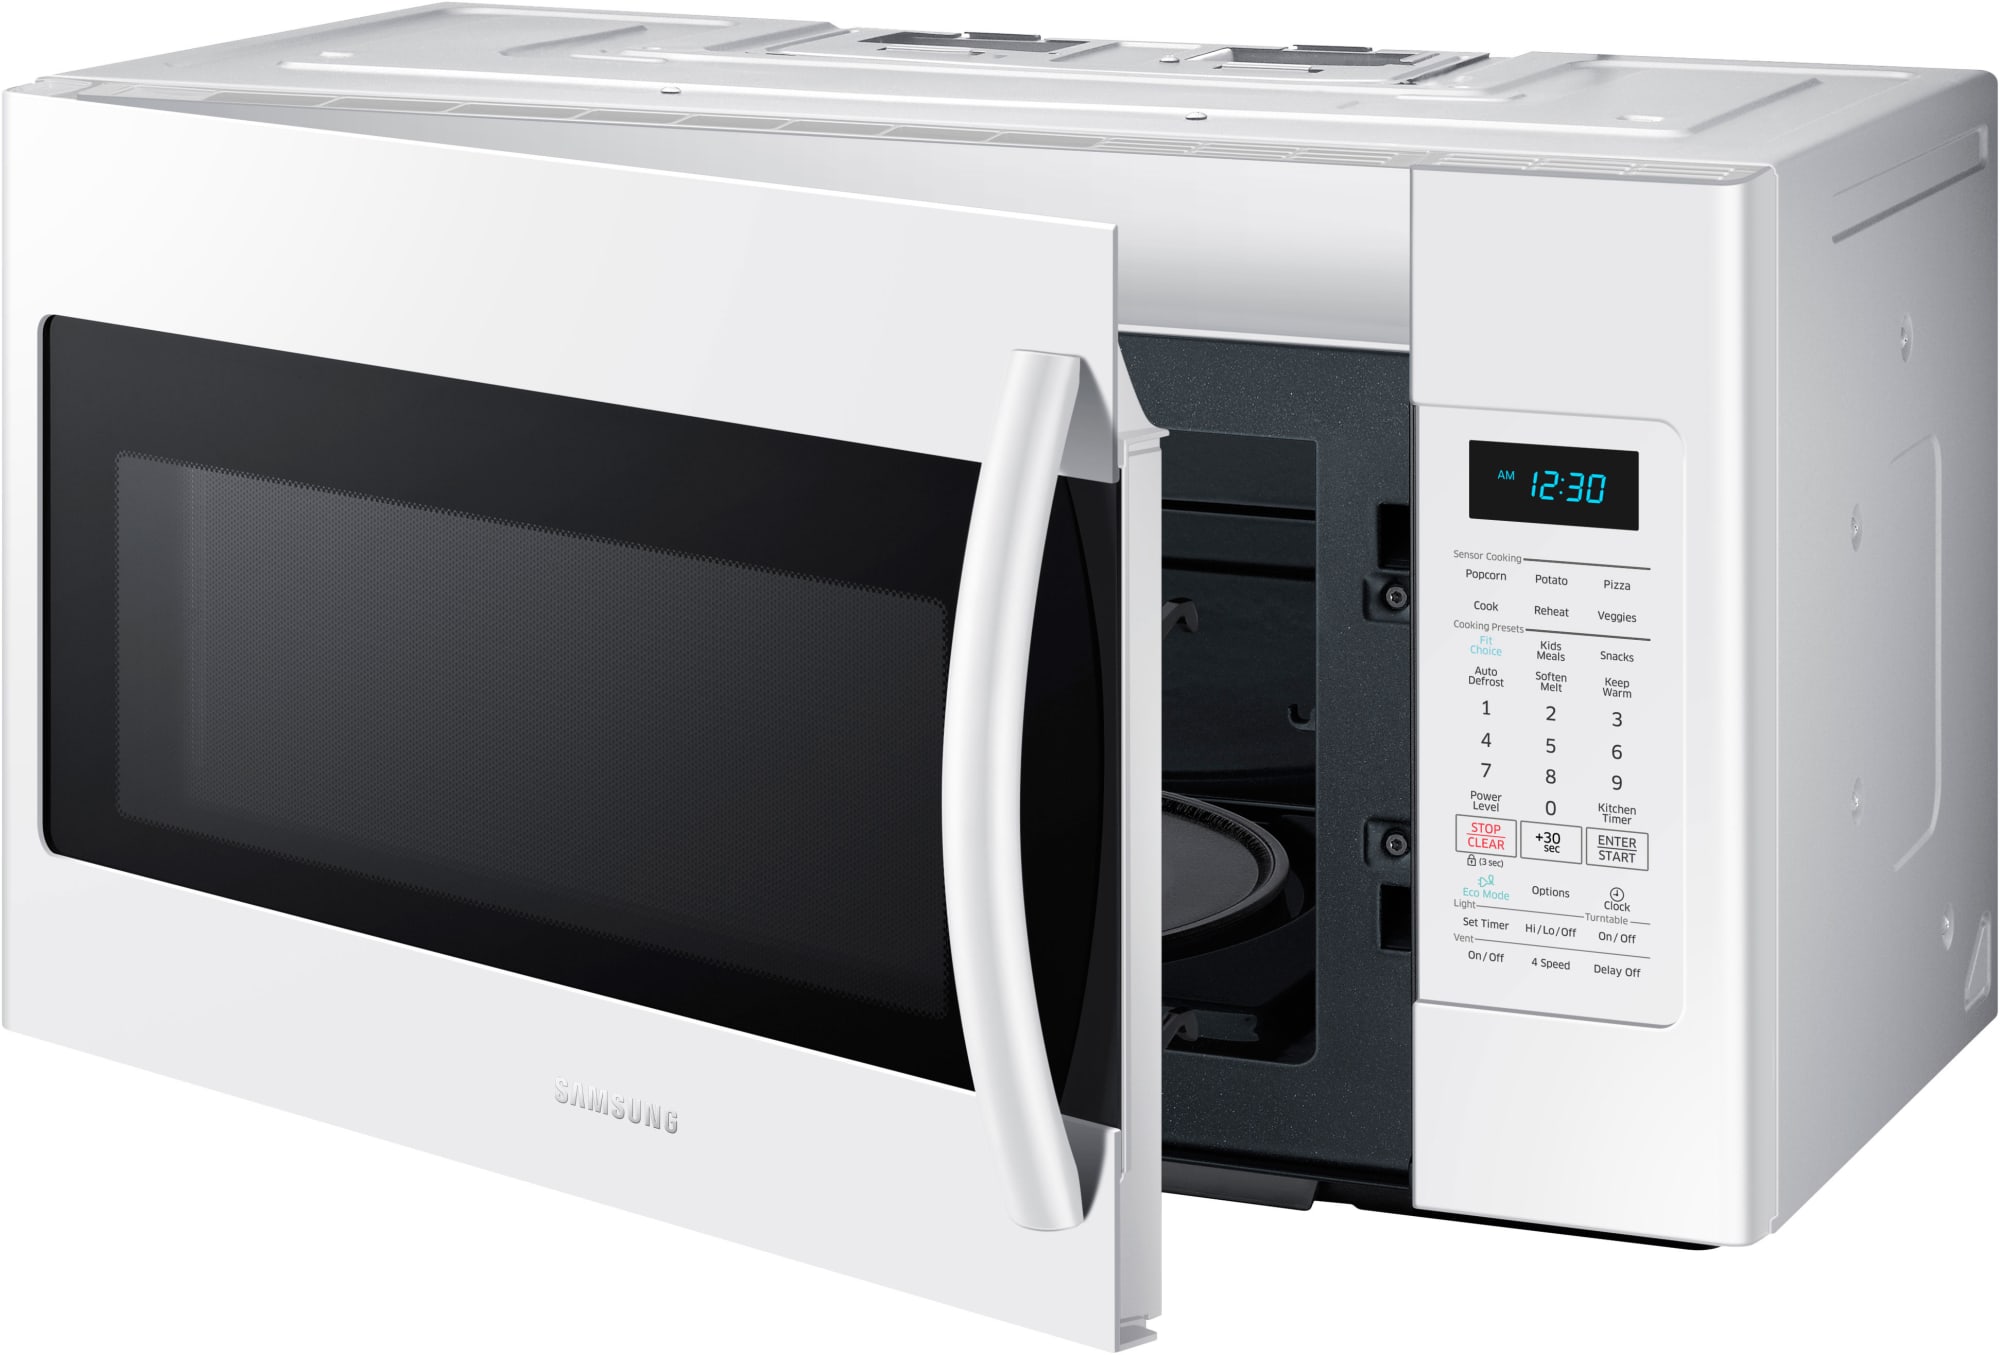 Samsung Me18h704sfw 18 Cu Ft Over The Range Microwave Oven With